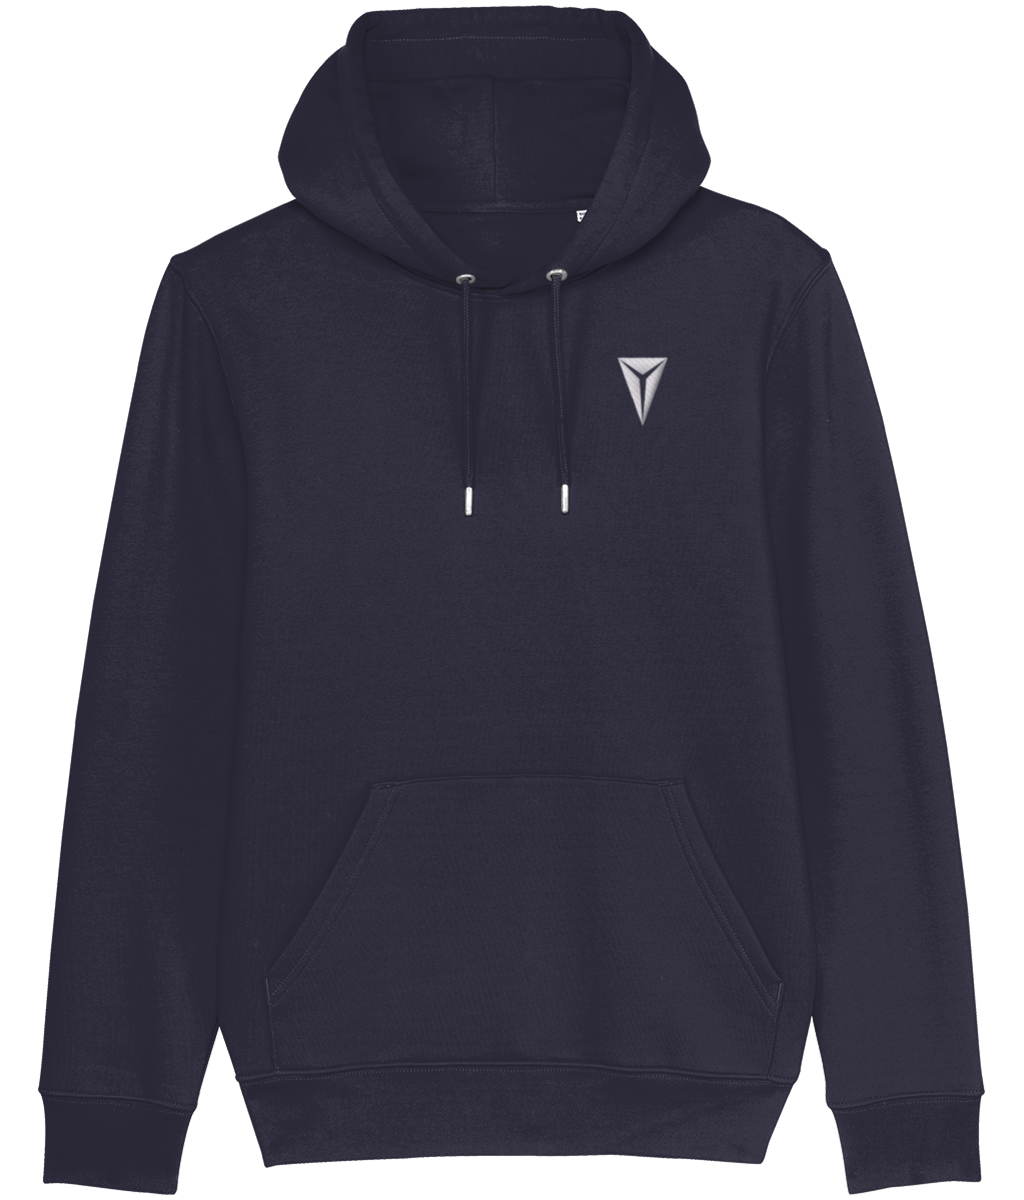 HEX Cruiser Premium Hoodie Embroidered with White Dragon Eye Logo French Navy